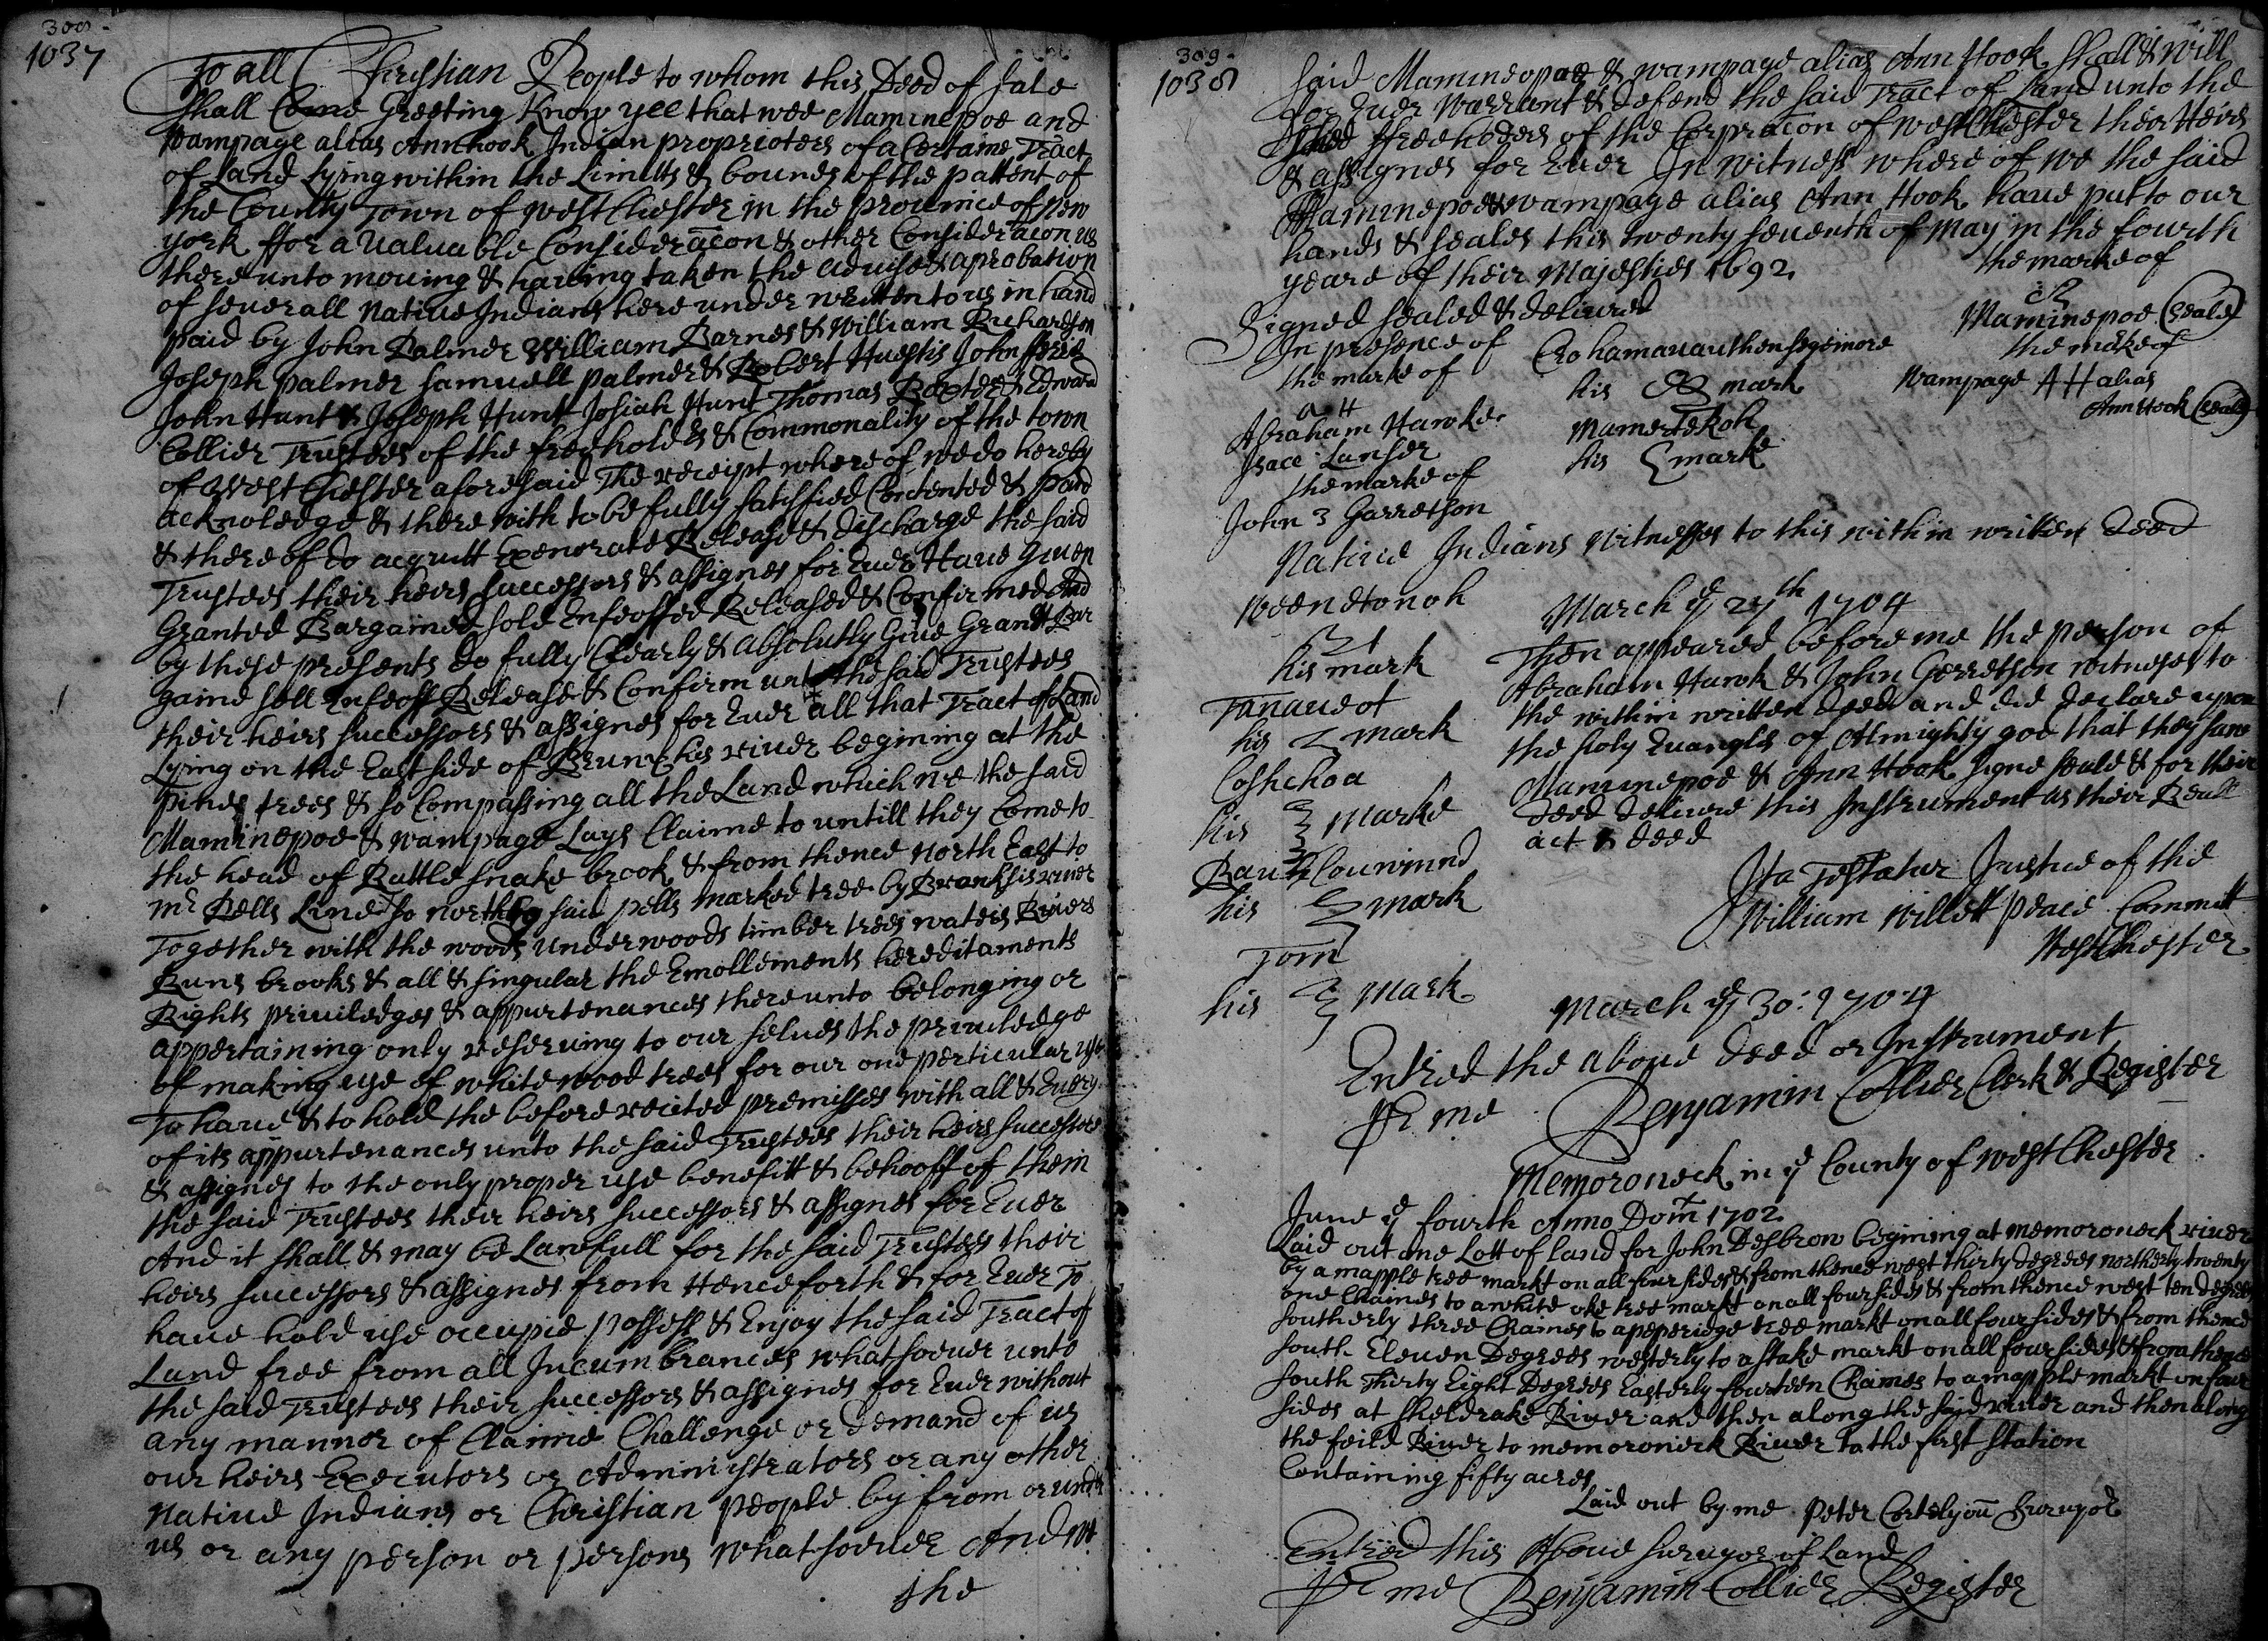 1692 - Deed from Siwanoys to Westchester (from original book)